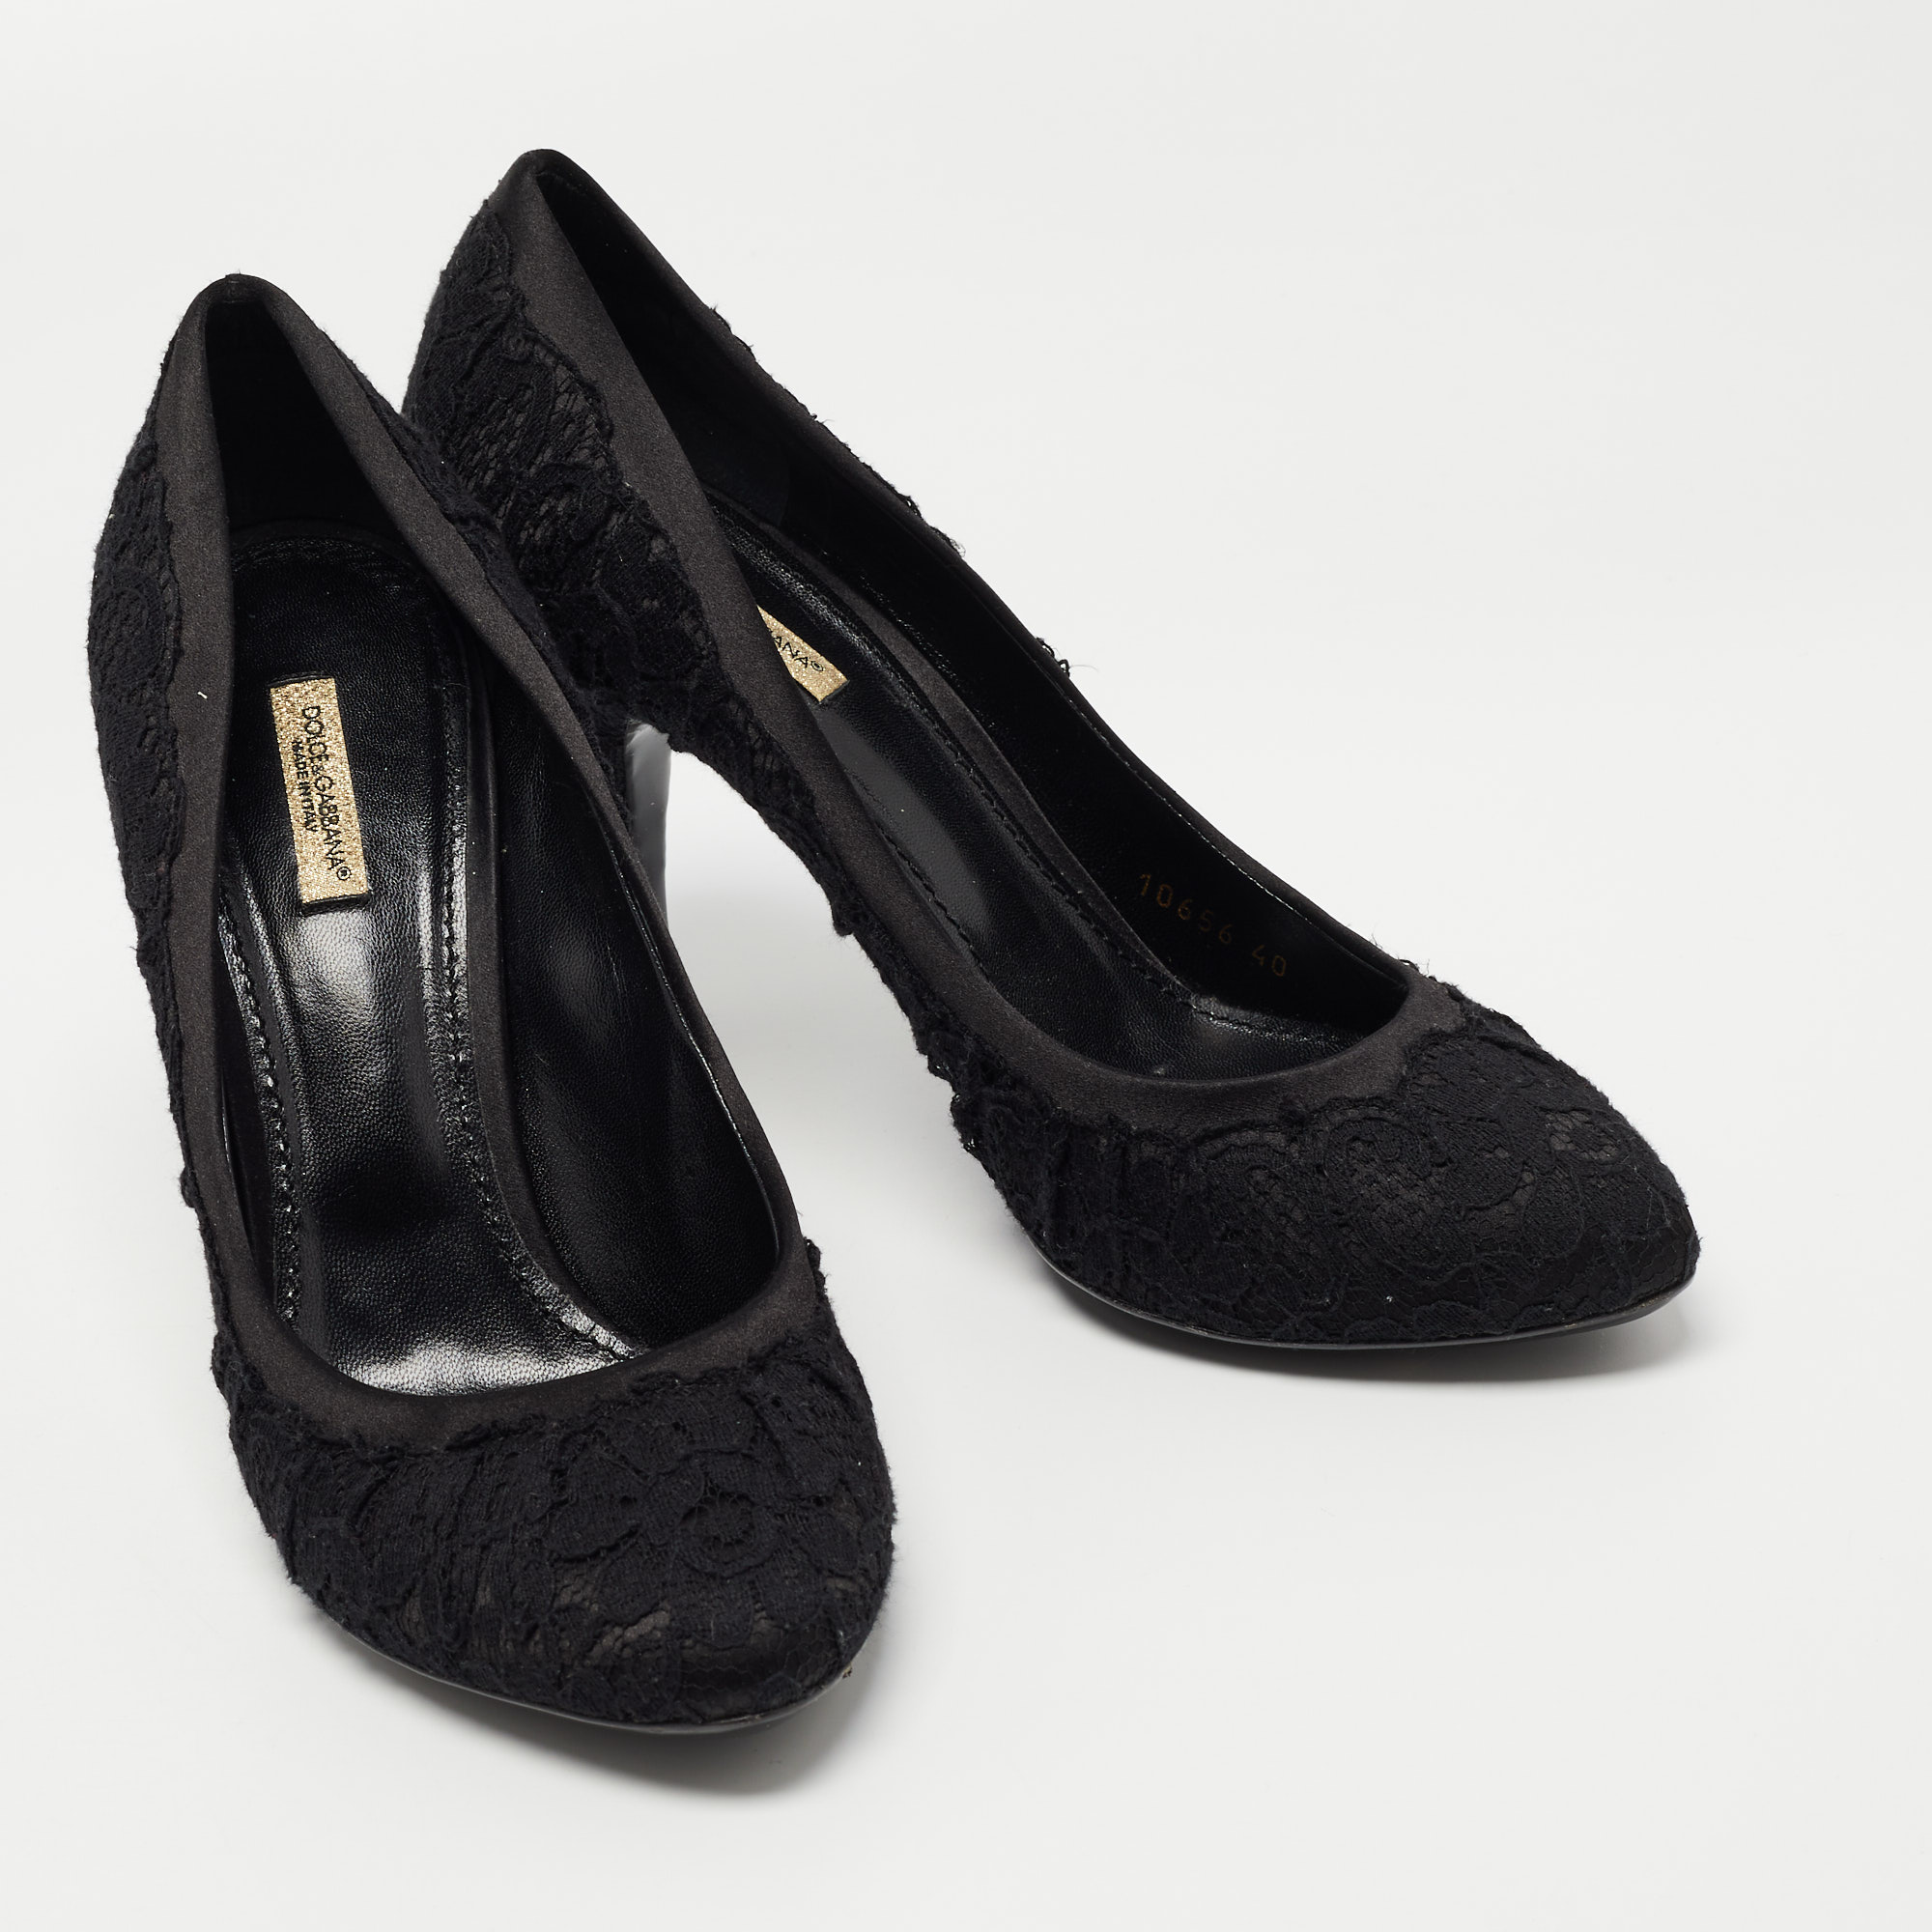 Dolce & Gabbana Black Lace And Satin Pointed Toe Pumps Size 40